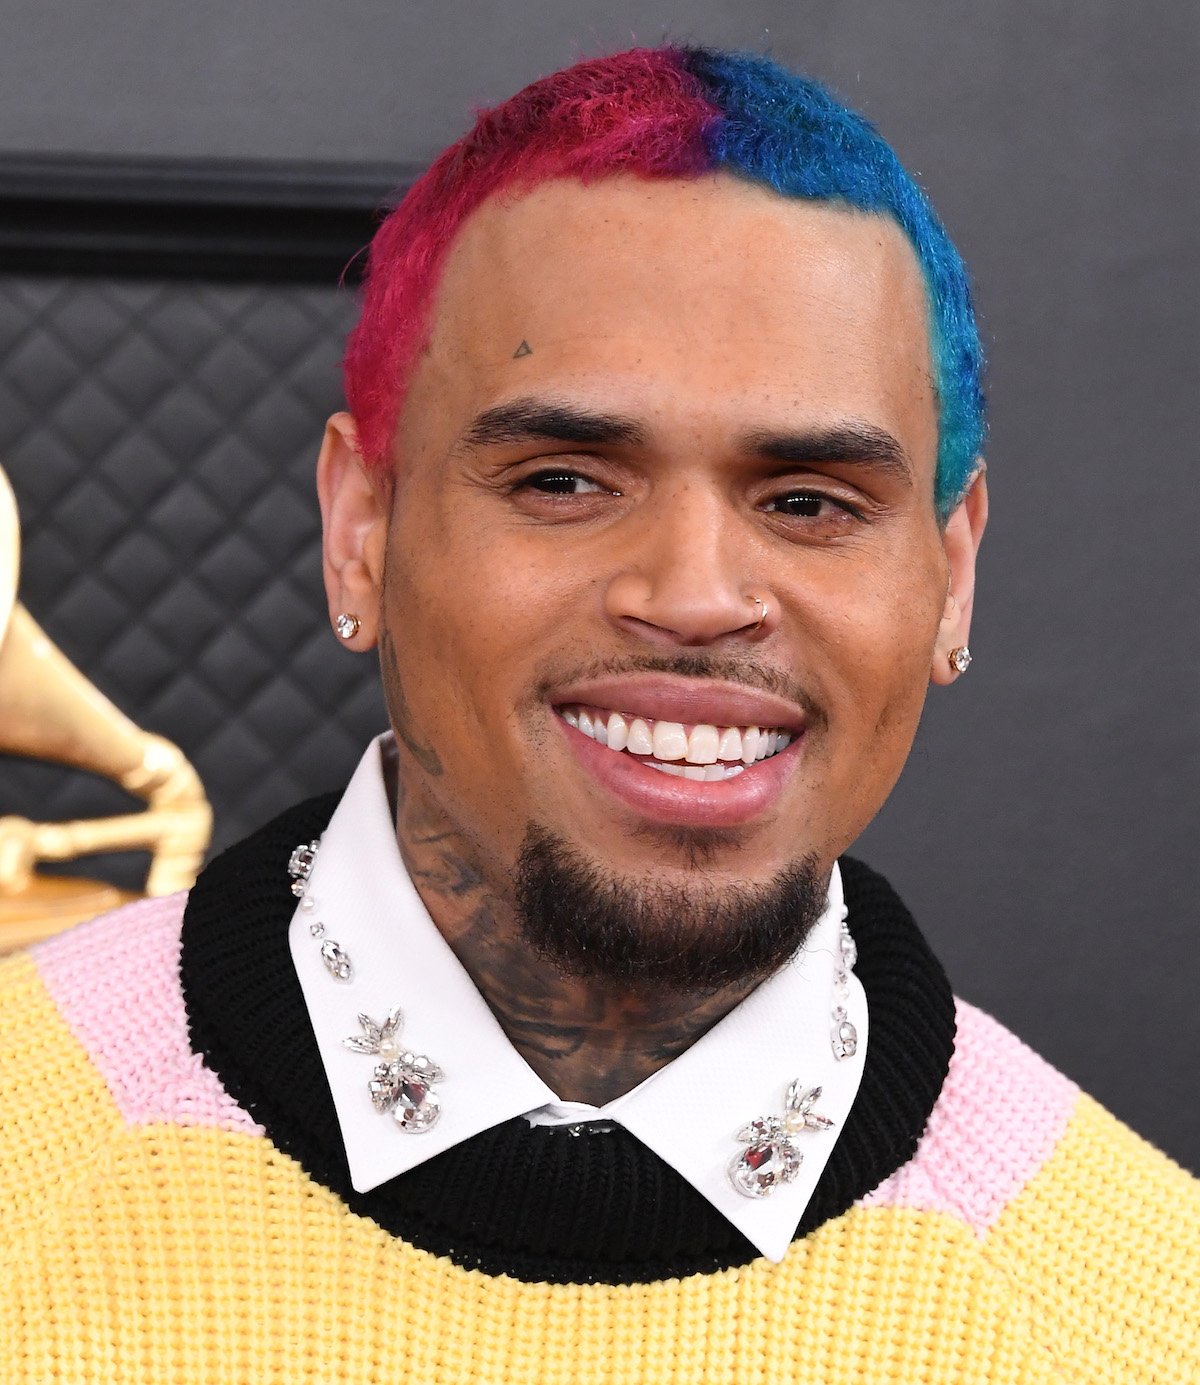 Chris Brown smiles for the camera at an event.